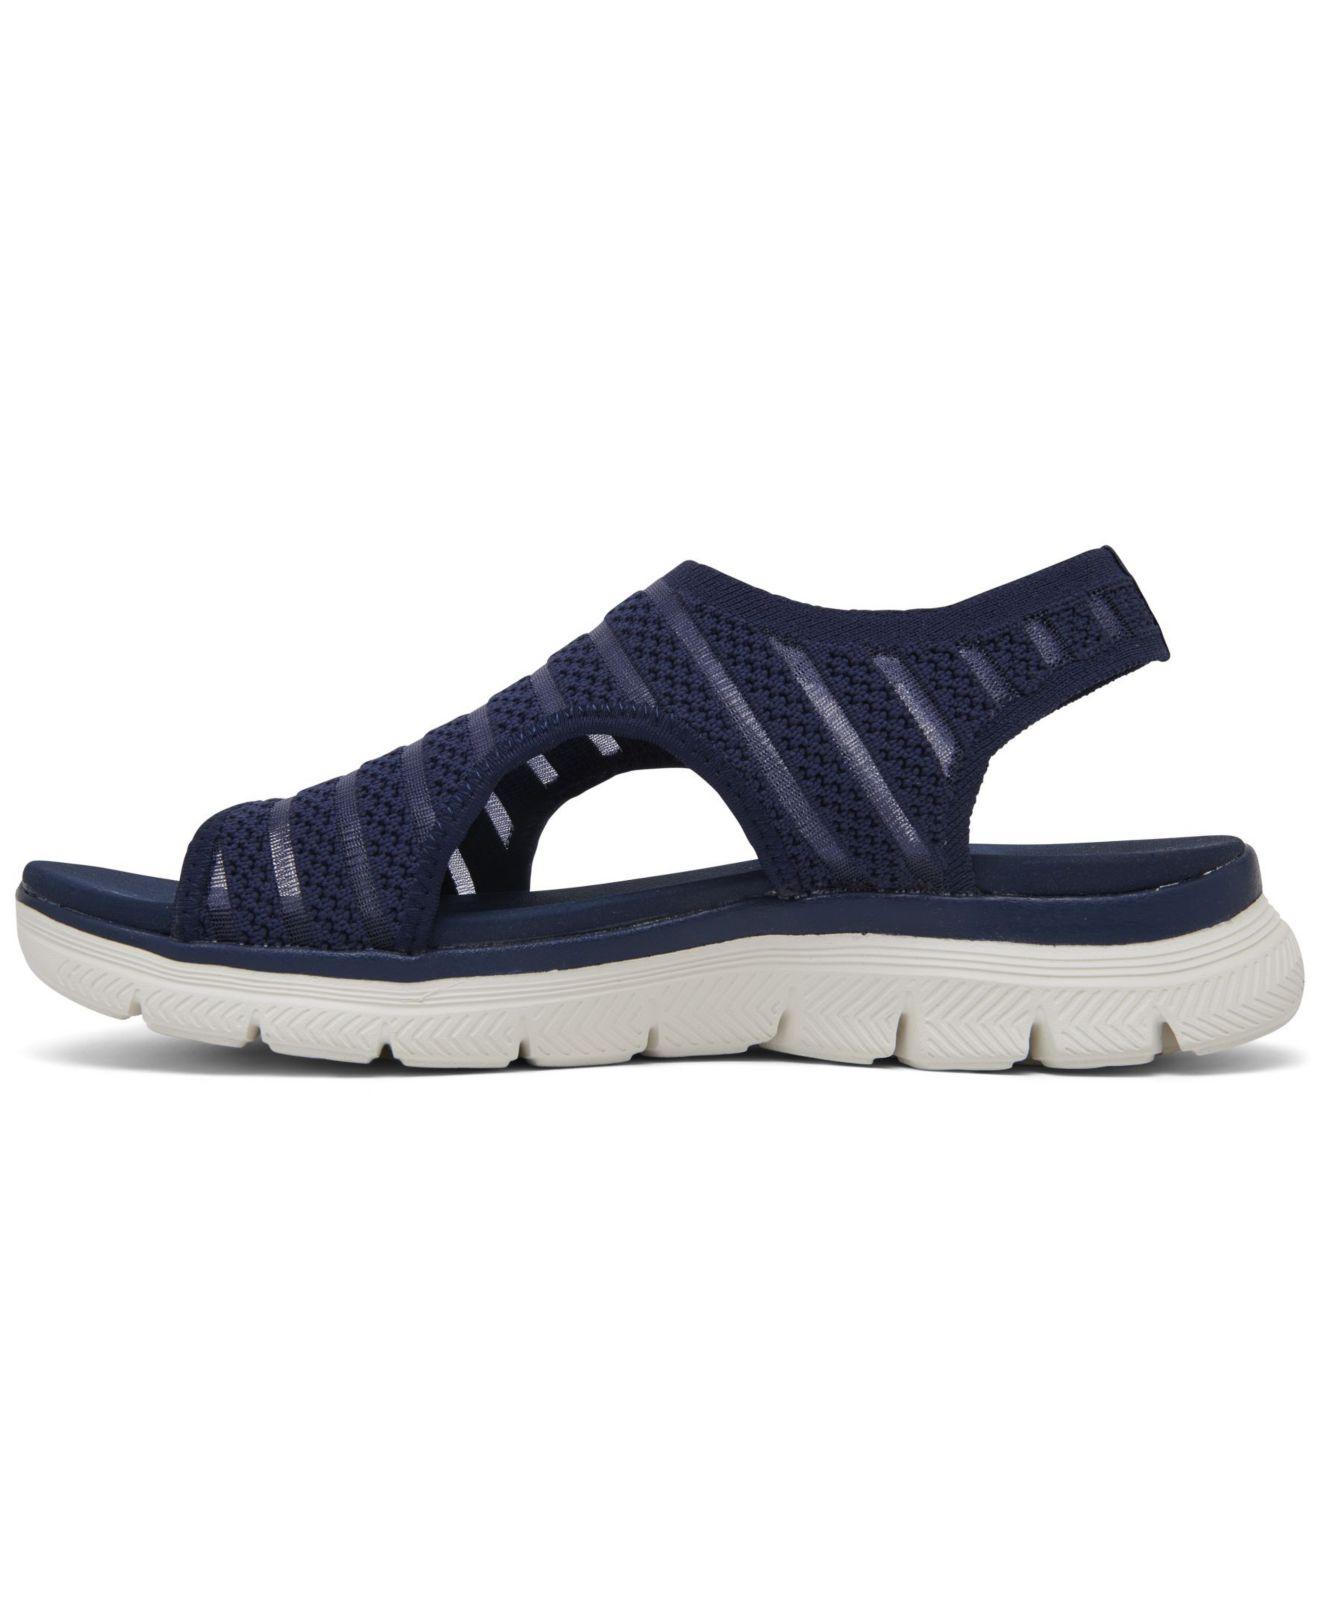 Flex Appeal 4.0 - Slip-on From Finish Line in Blue | Lyst